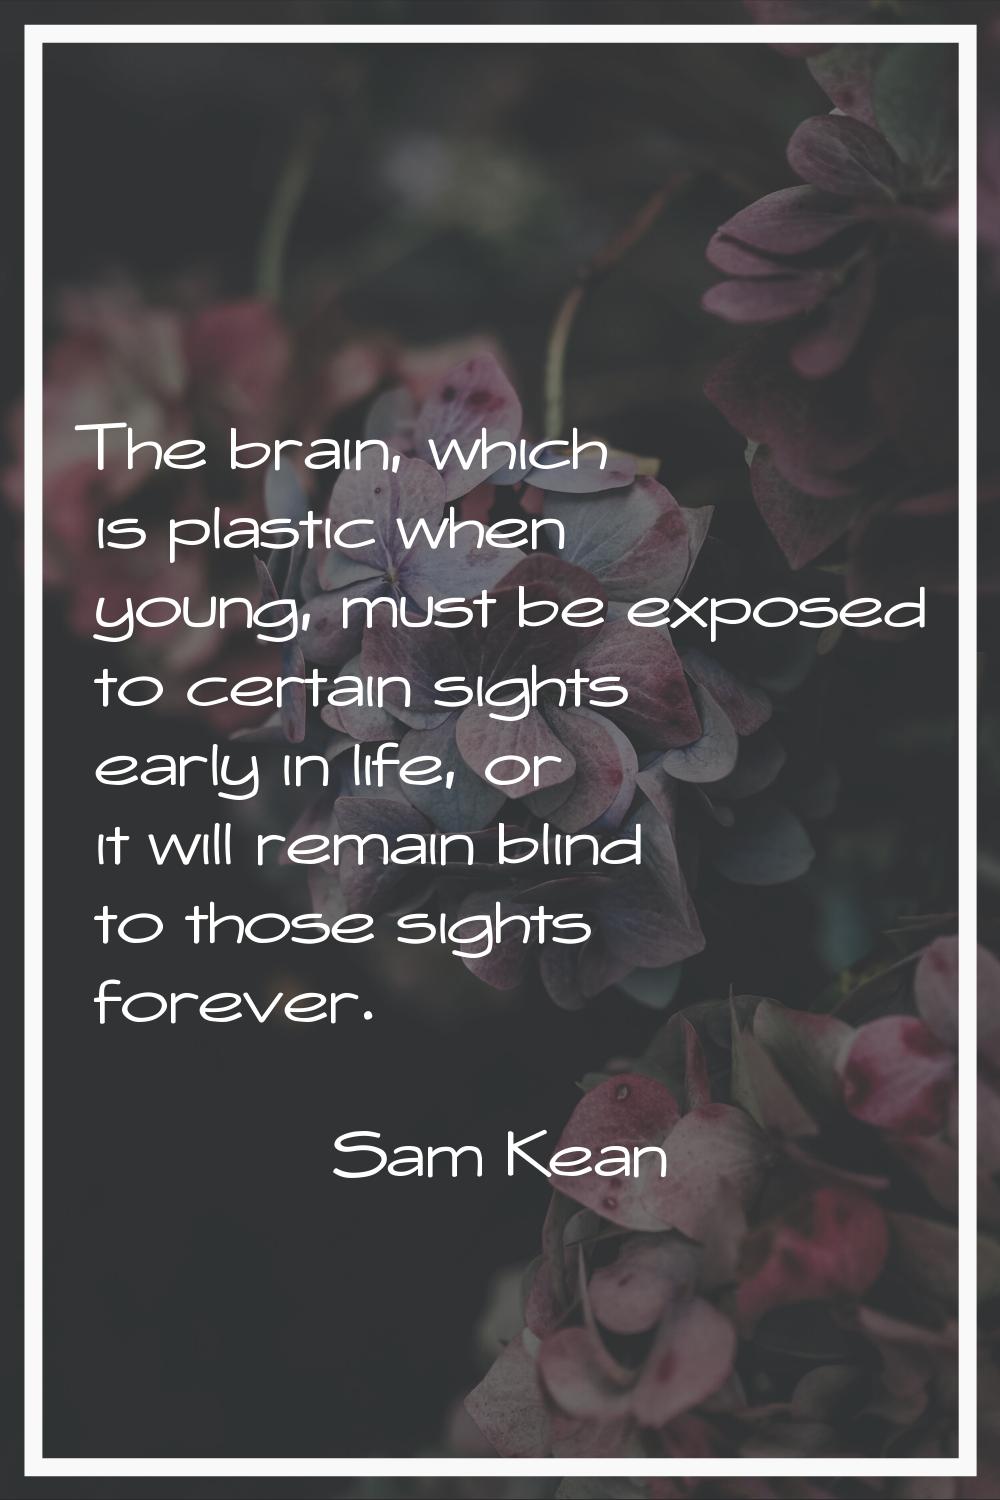 The brain, which is plastic when young, must be exposed to certain sights early in life, or it will